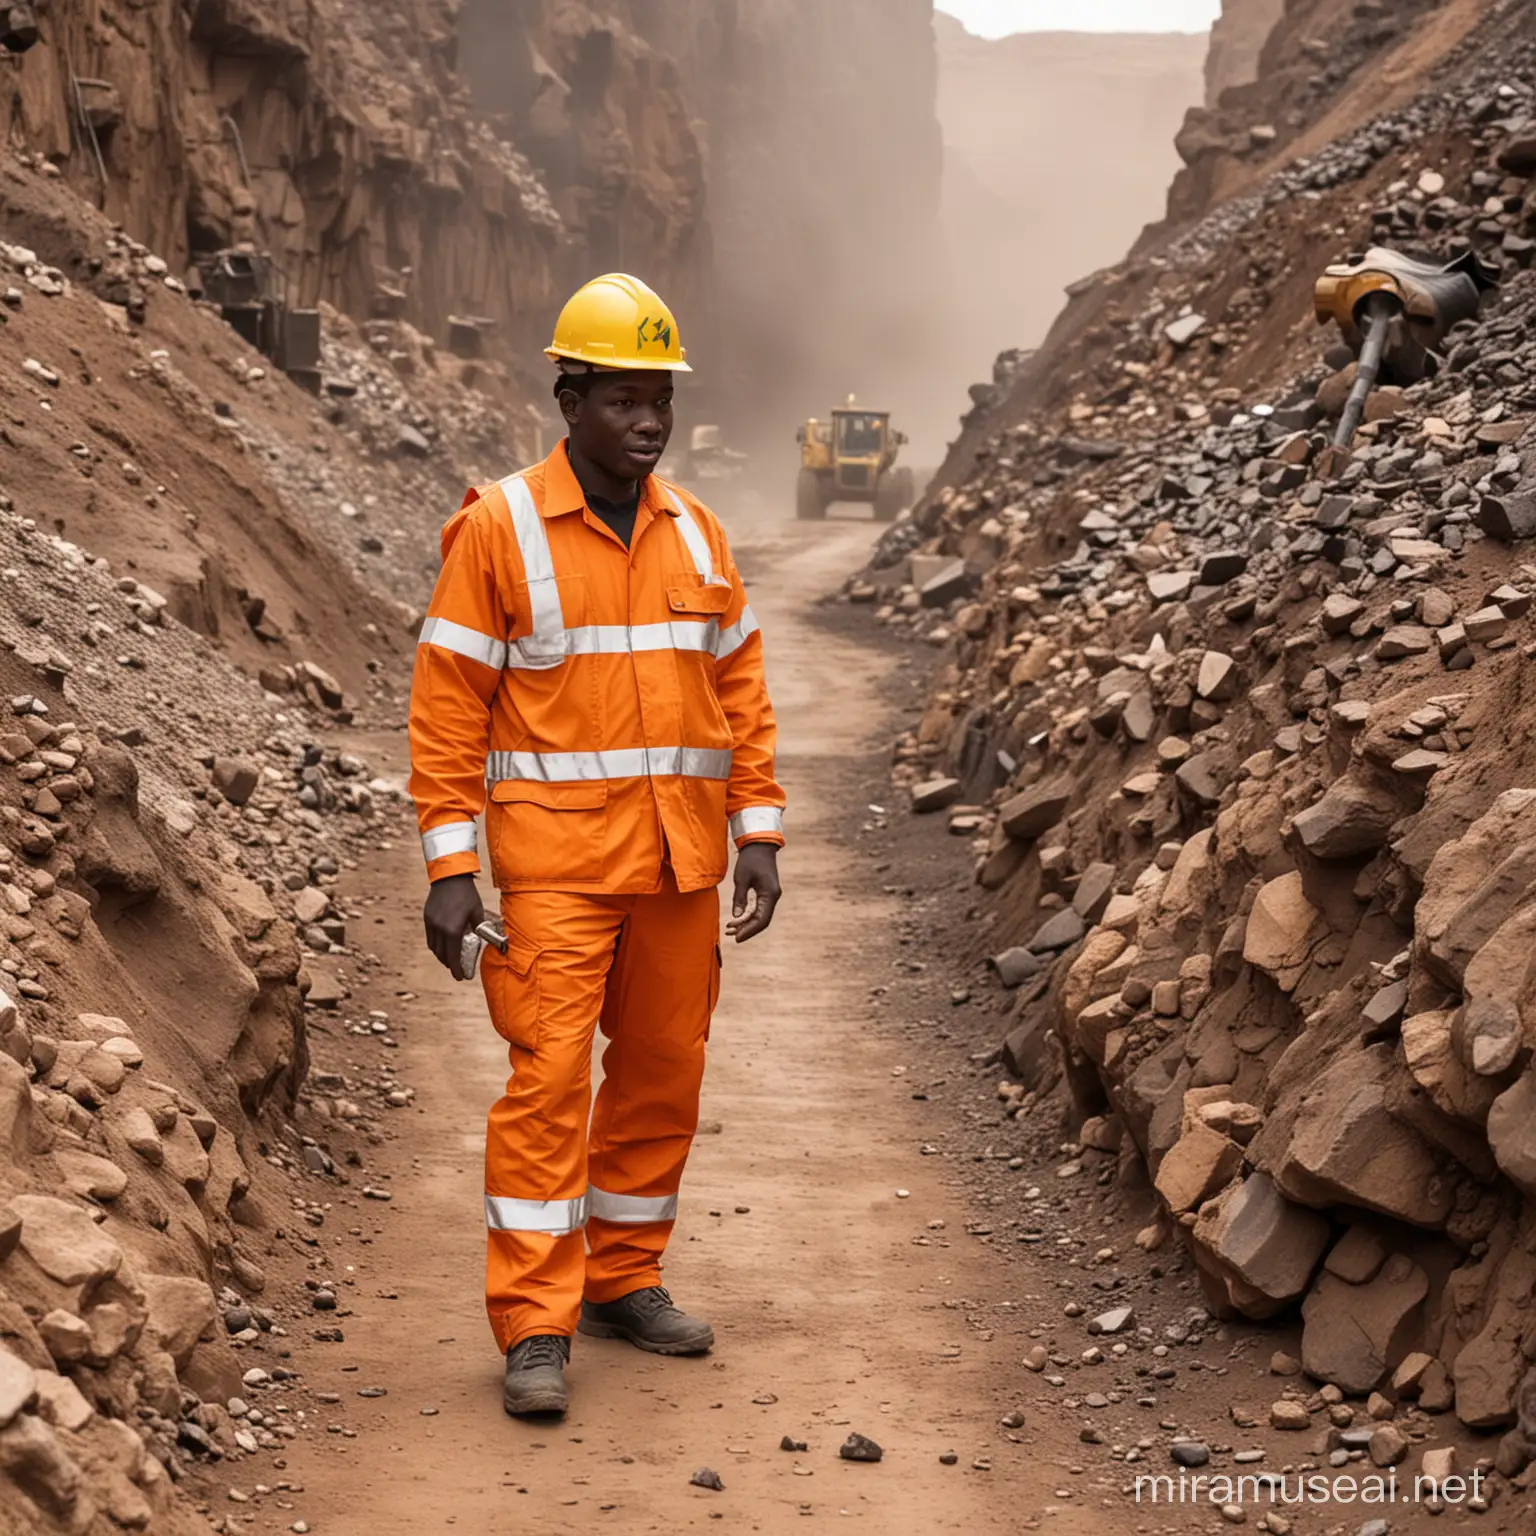 Prominent Safety Measures in African Mining Operations